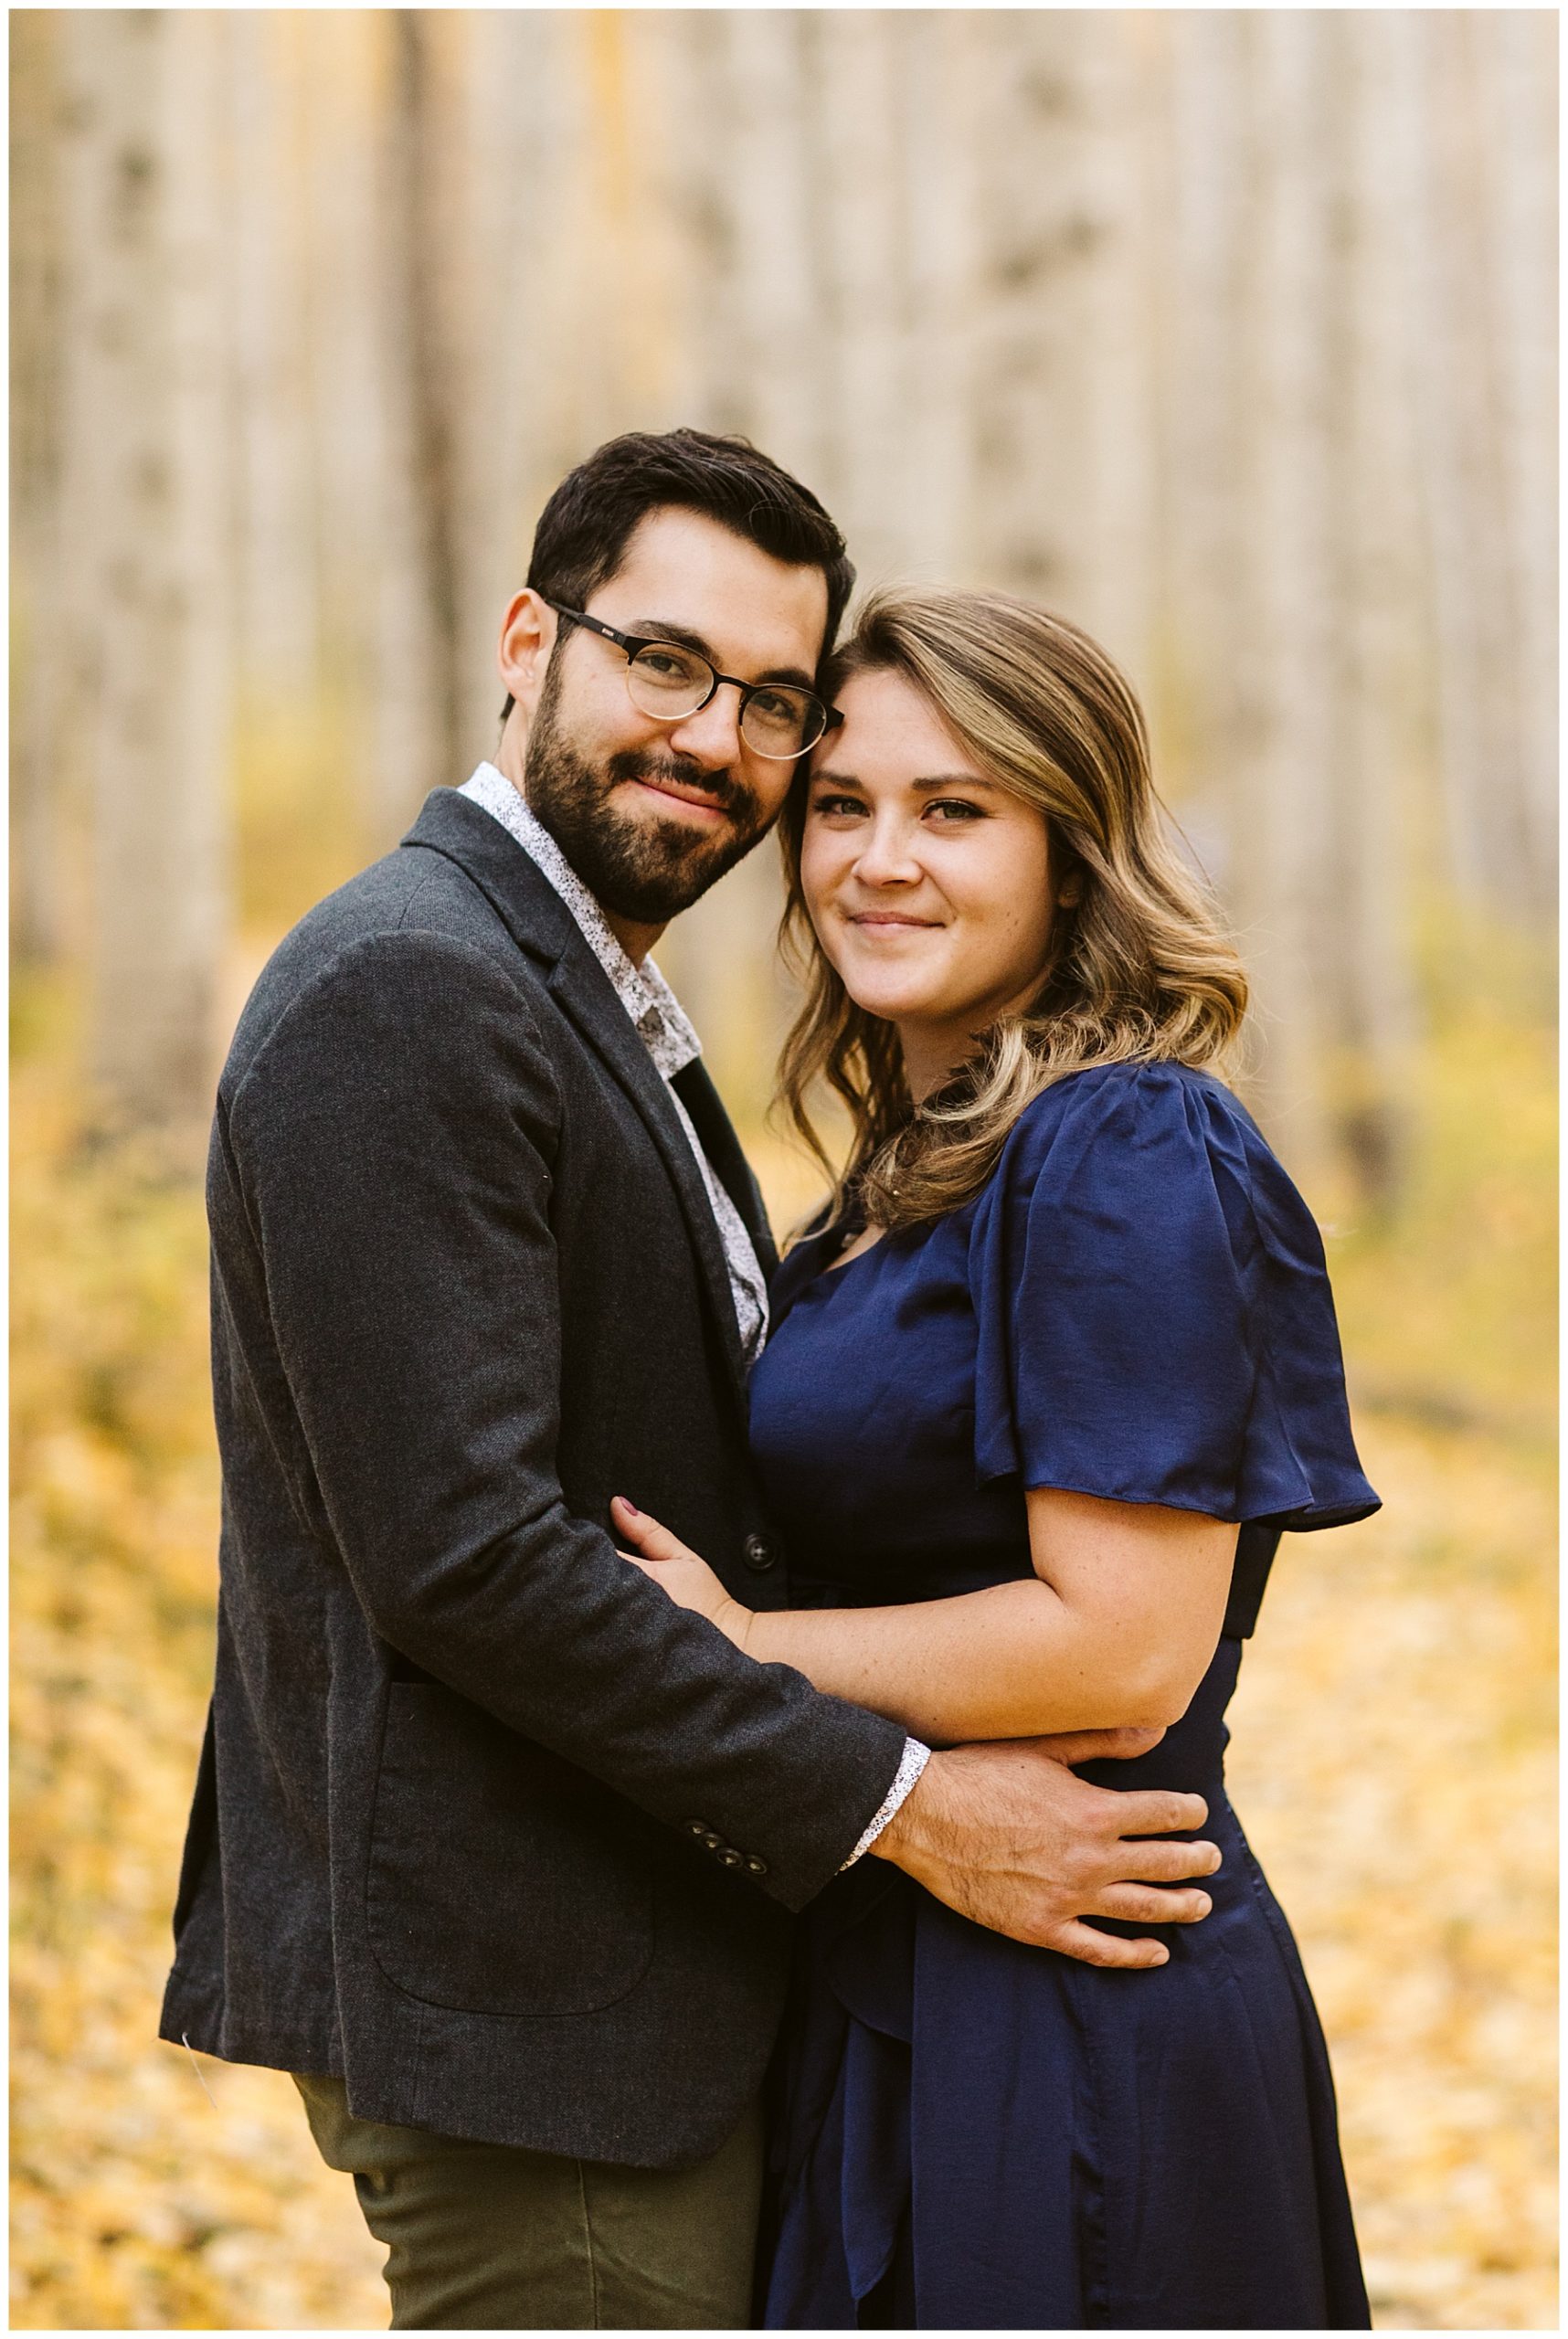 engagement portrait of couple in fall aspen forest